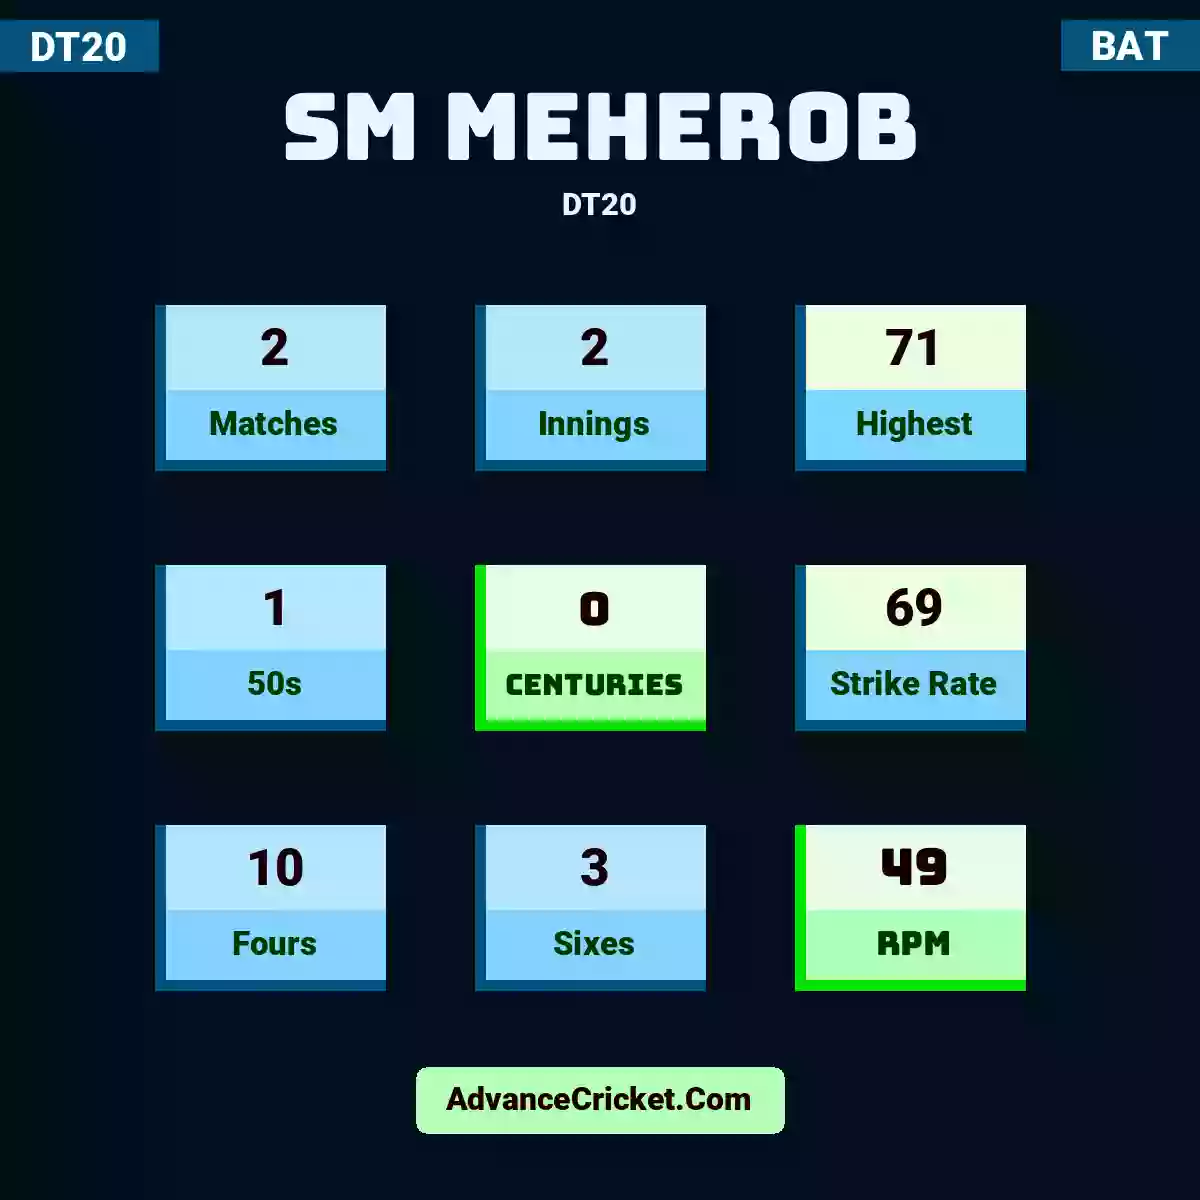 SM Meherob DT20 , SM Meherob played 2 matches, scored 71 runs as highest, 1 half-centuries, and 0 centuries, with a strike rate of 69. S.Meherob hit 10 fours and 3 sixes, with an RPM of 49.